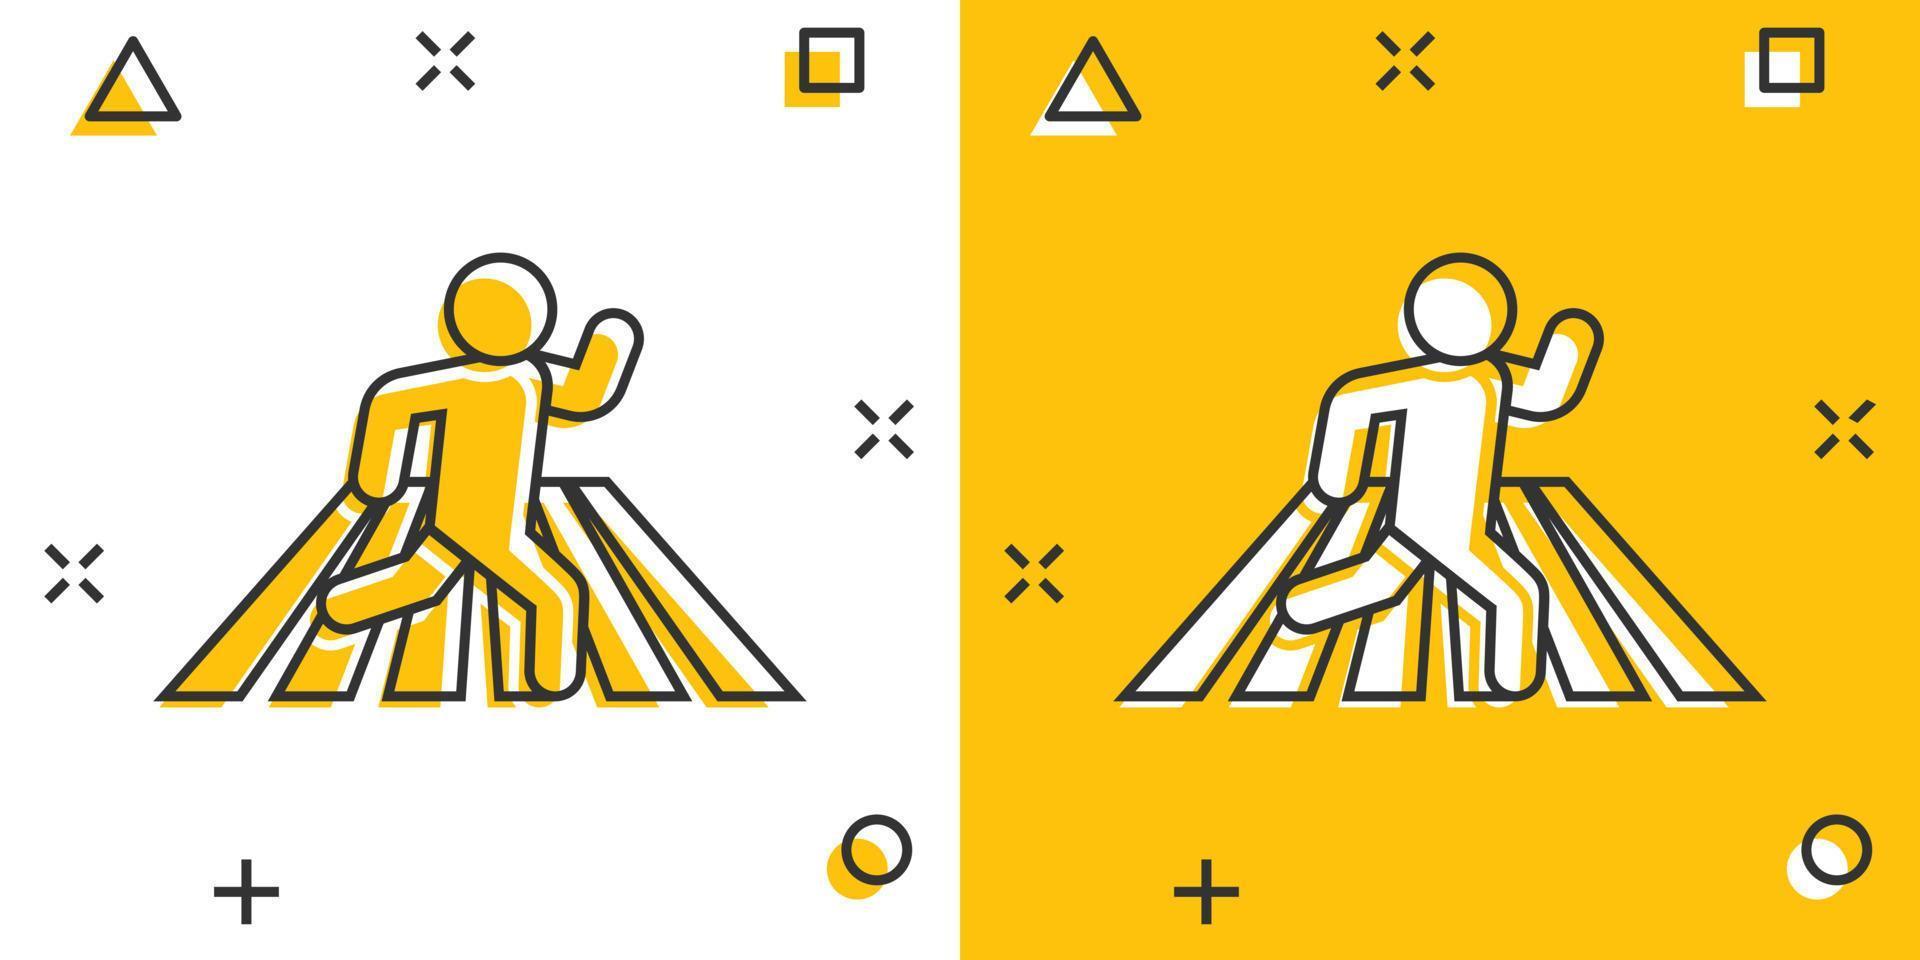 Pedestrian crosswalk icon in comic style. People walkway cartoon sign vector illustration on white isolated background. Navigation splash effect business concept.